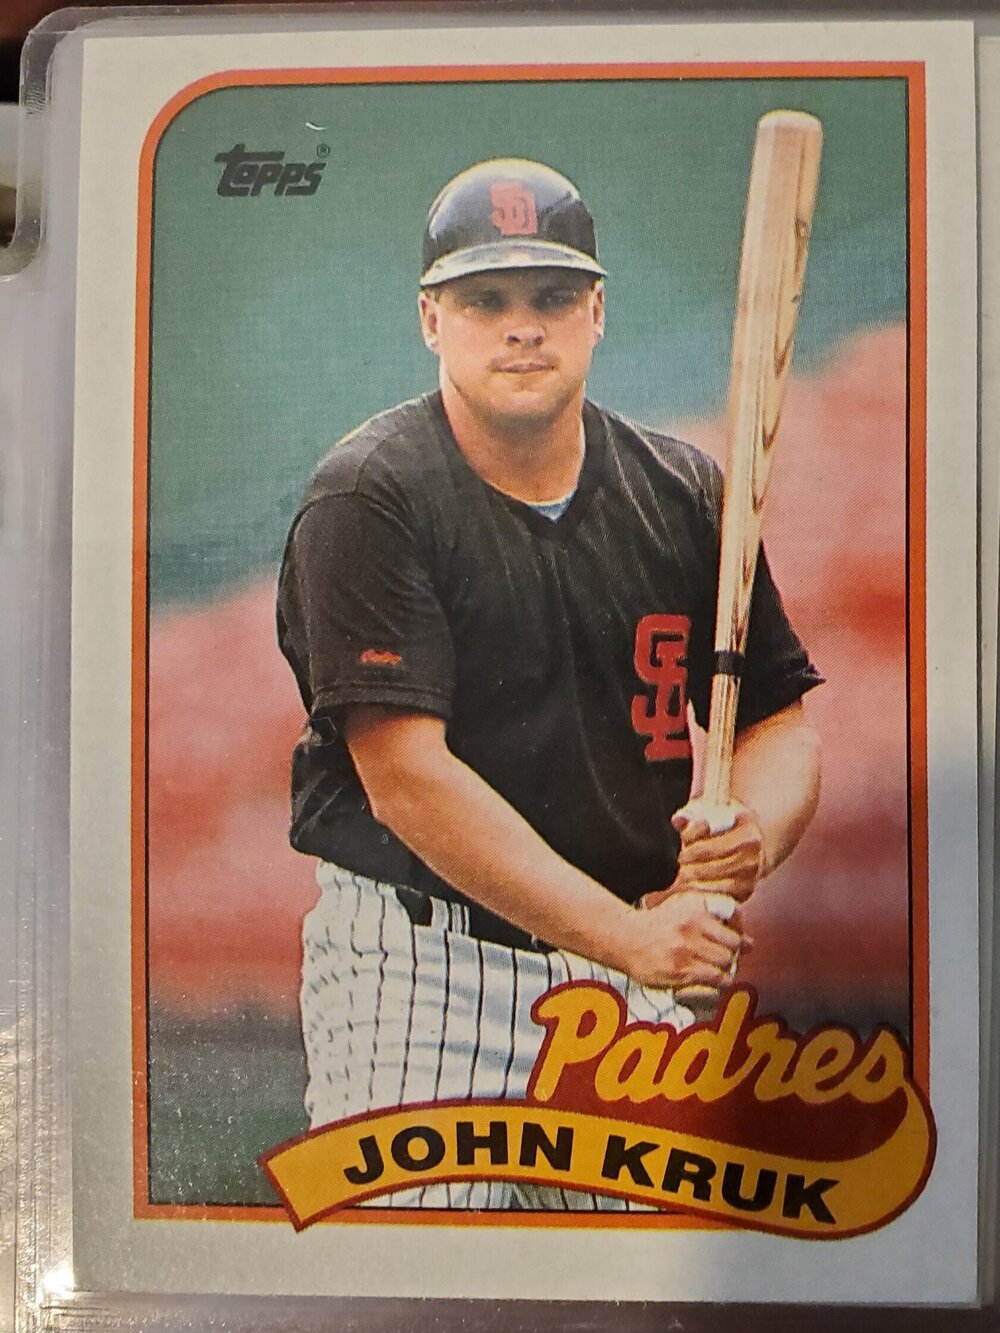 Who remembered Kruk was on the Padres?